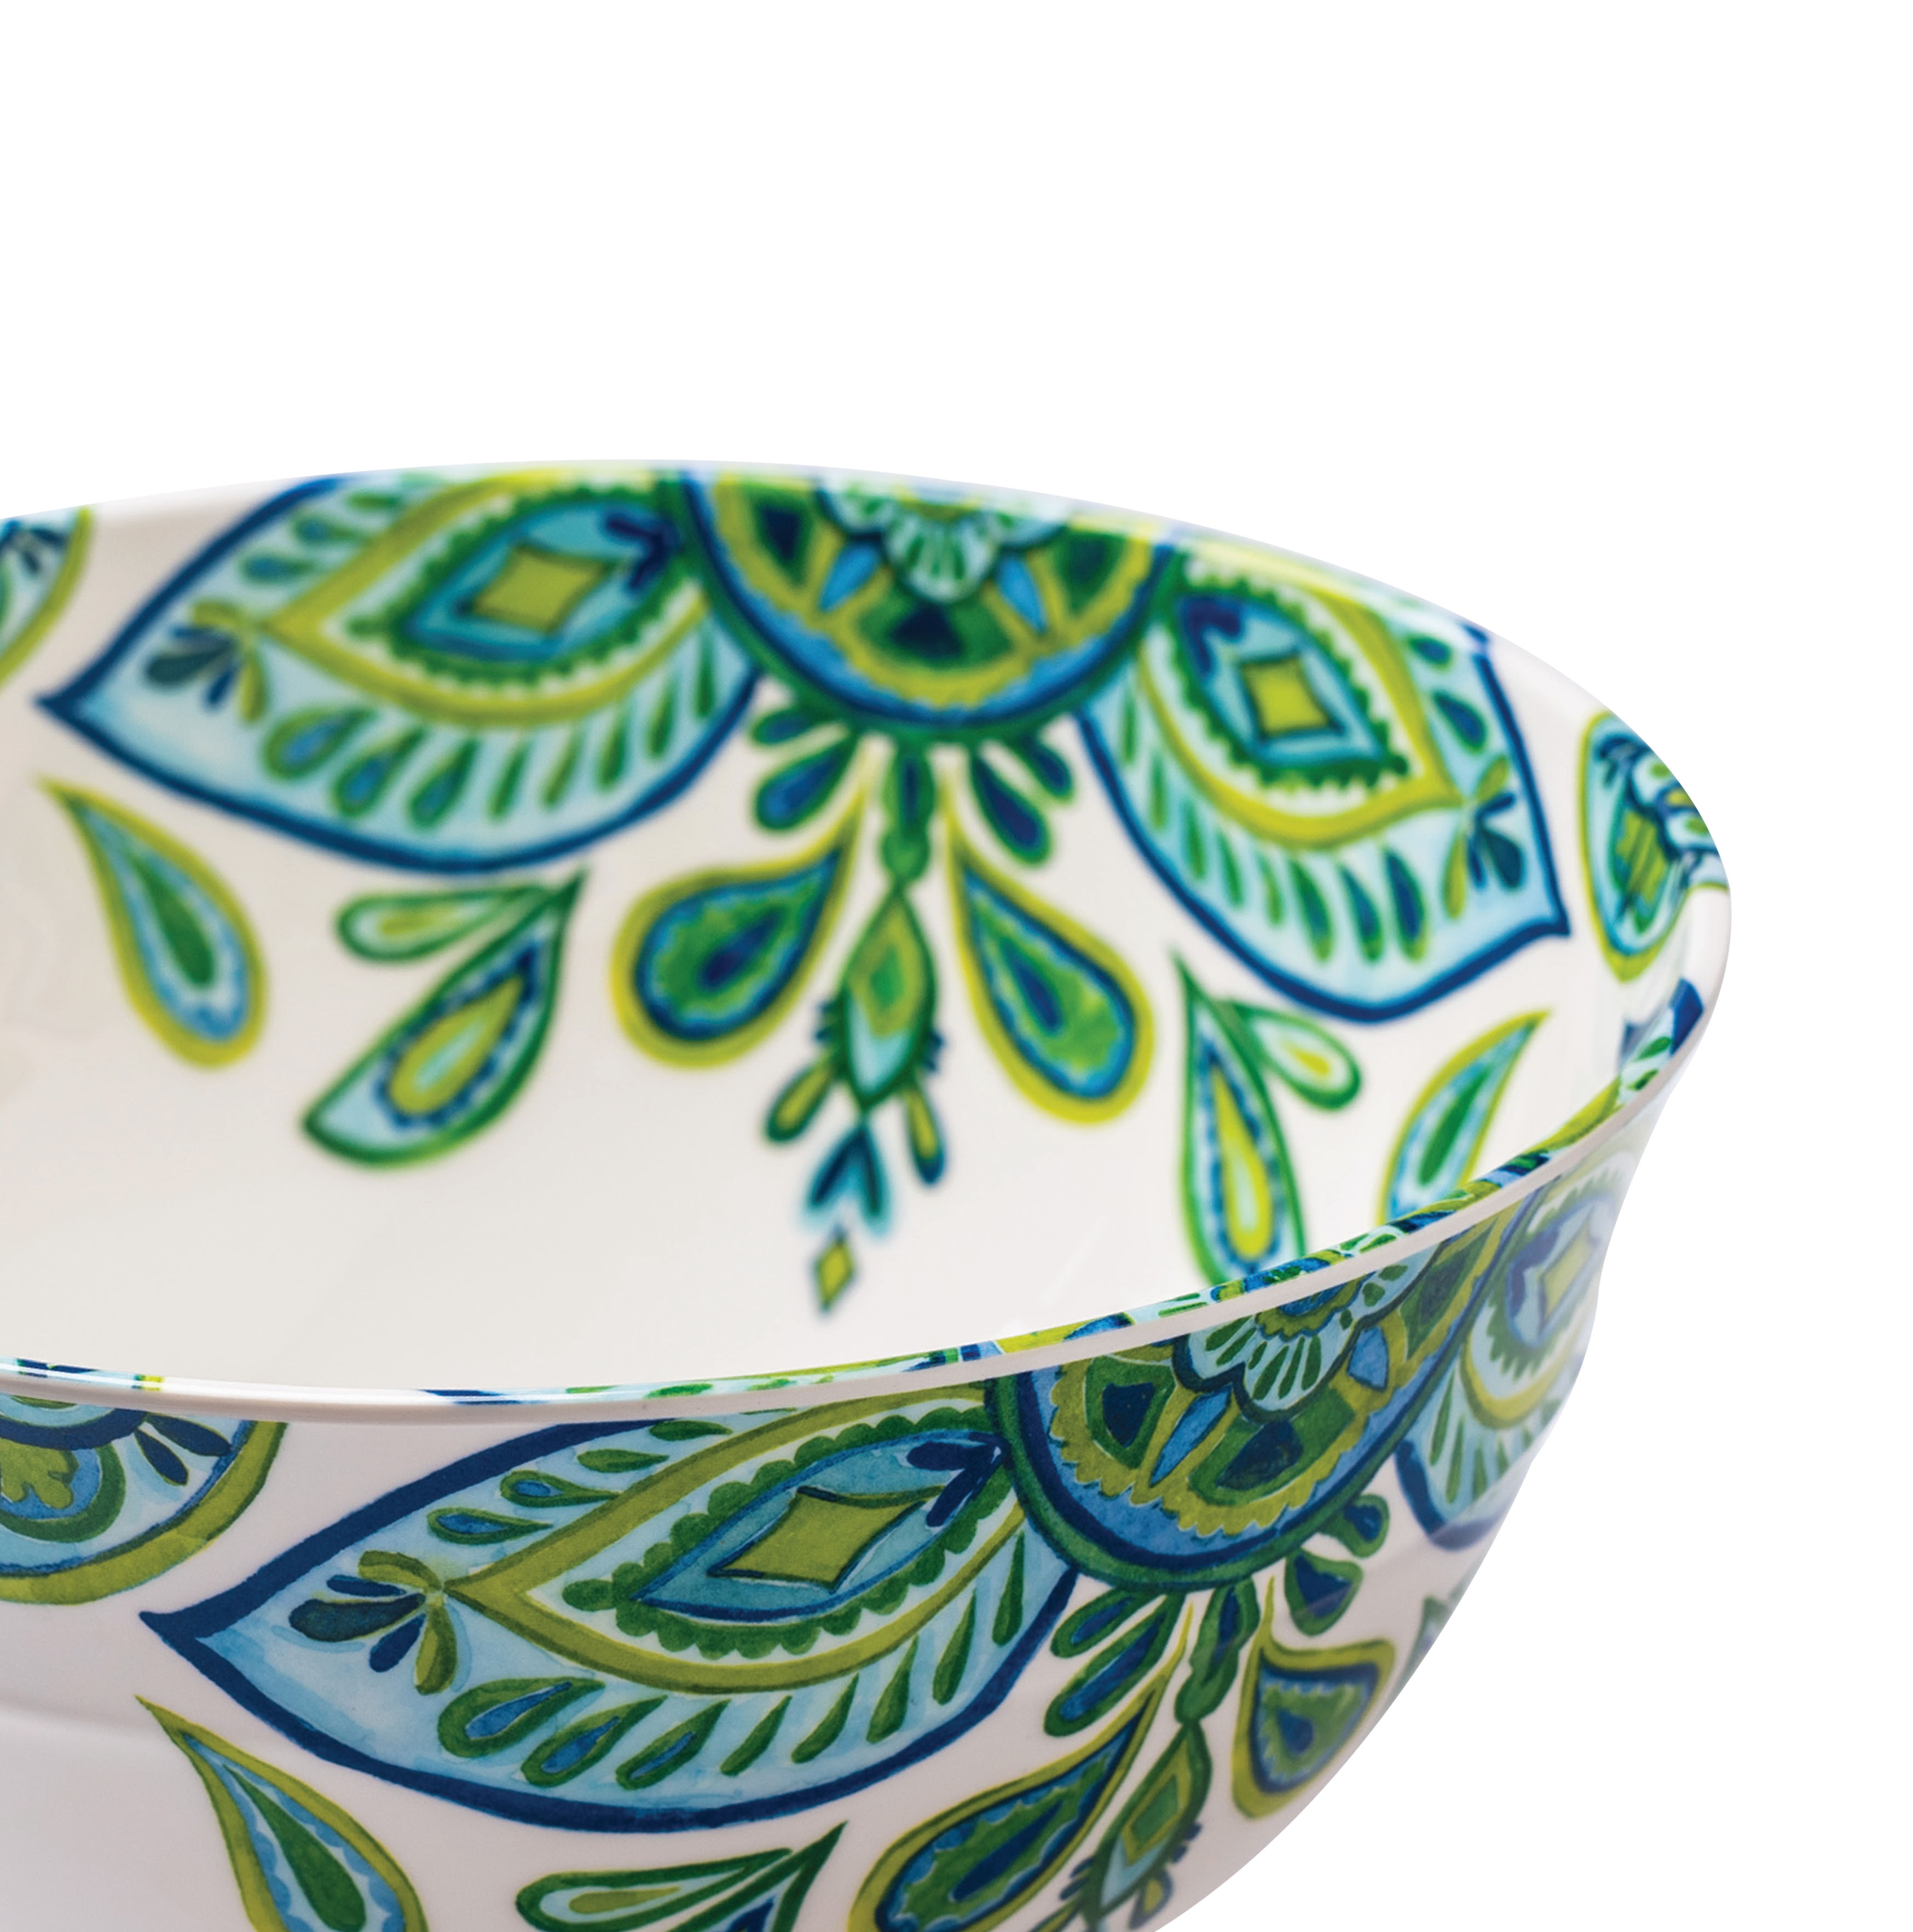 10 Piece Melamine Mixing Bowl Set with Lids, Green and Blue Floral - image 4 of 8